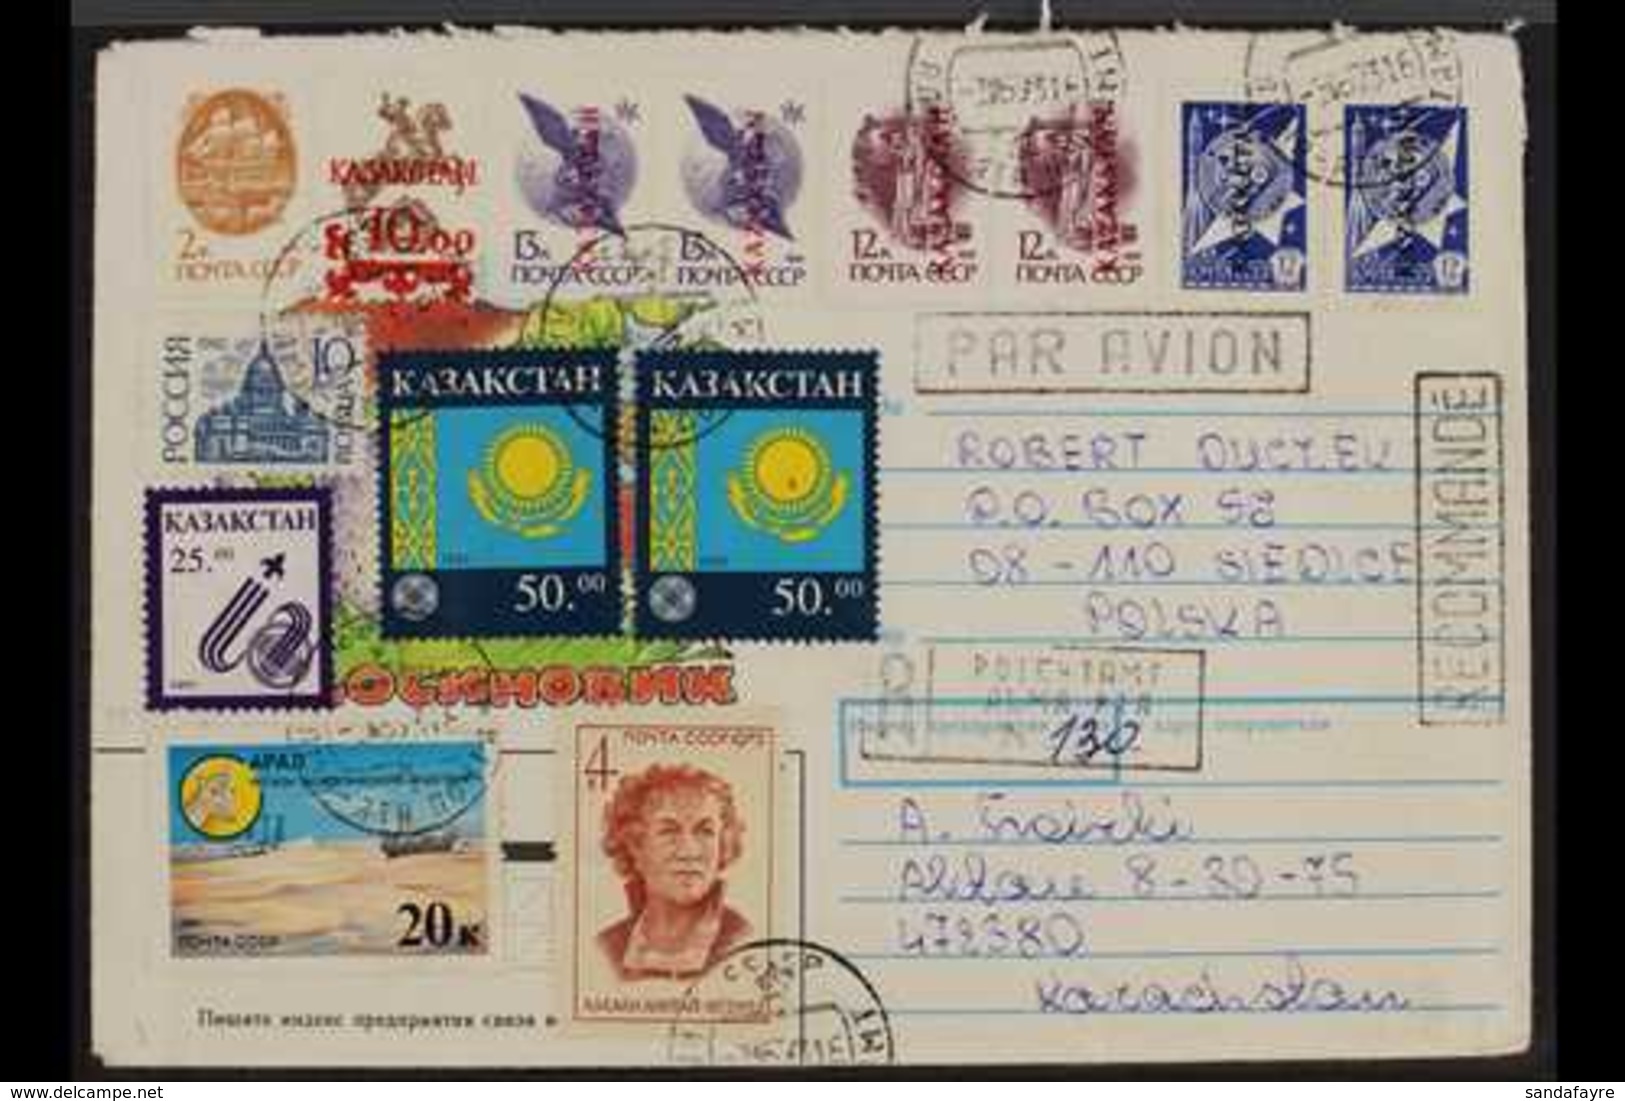 1993 (June) Registered Cover Addressed To Poland, Bearing Mixed Franking Of Soviet Union, Russi And Kazakhstan Stamps (t - Kasachstan